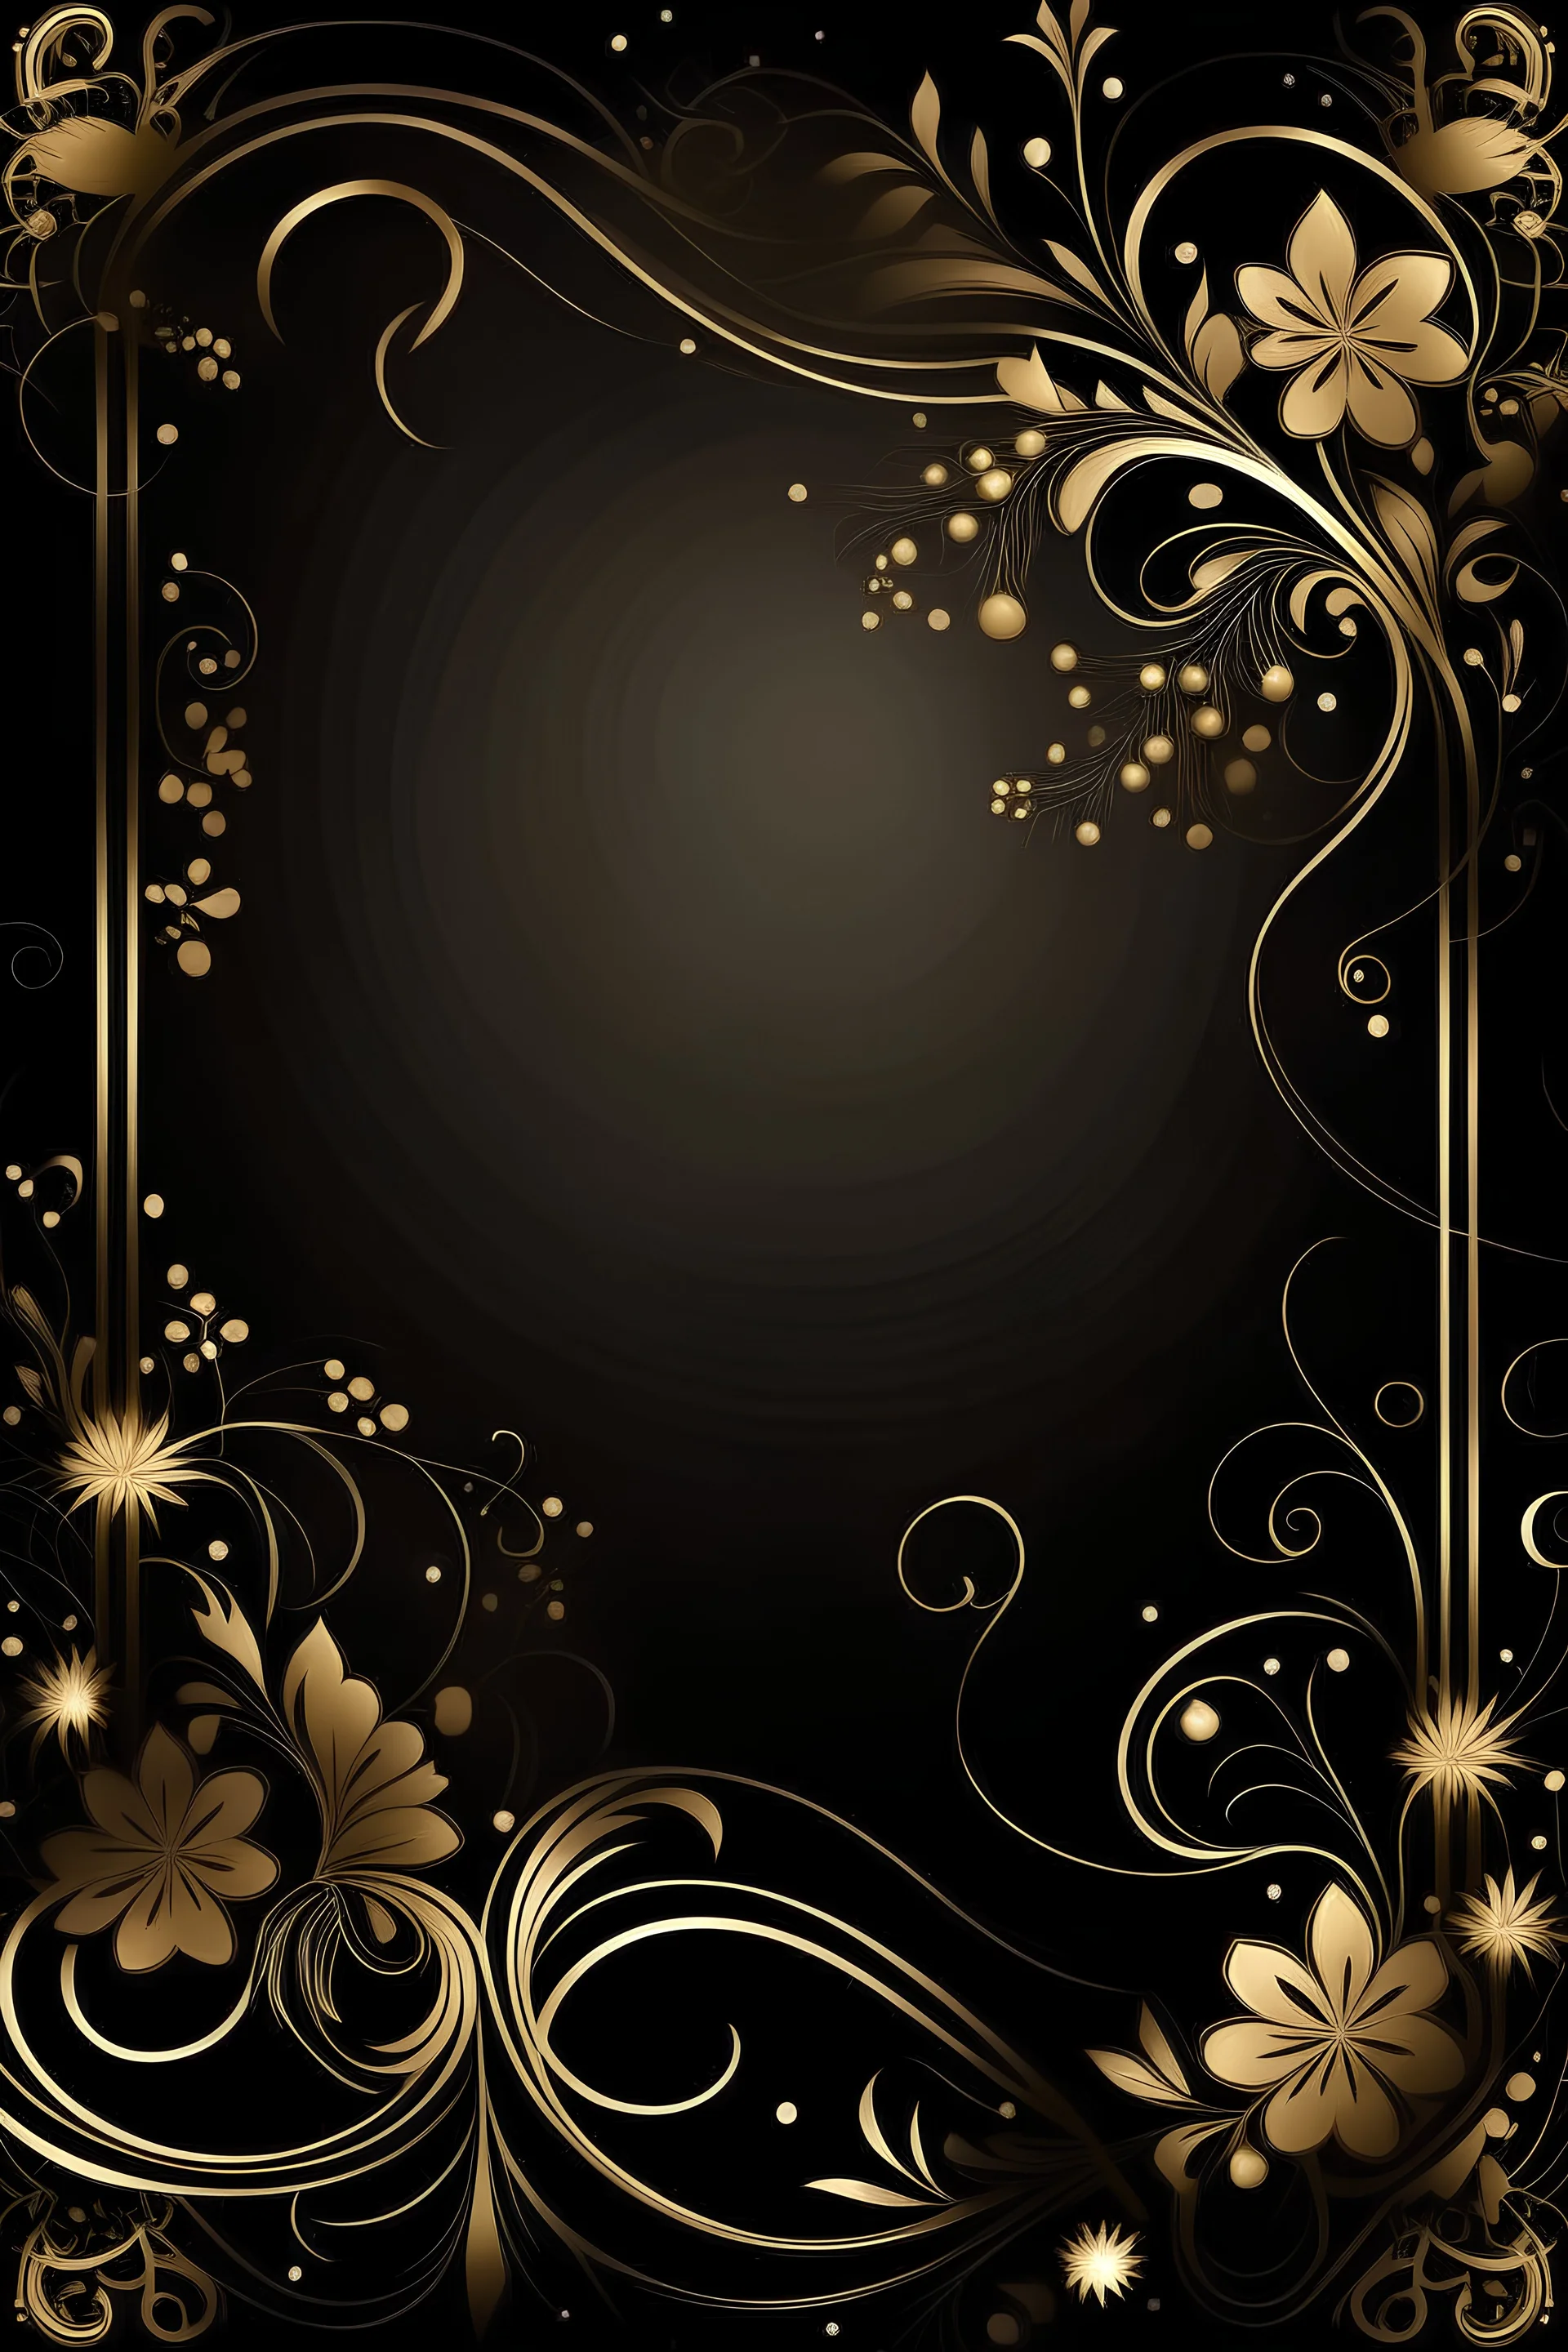 a background for an invitation card, gala, dinner, party